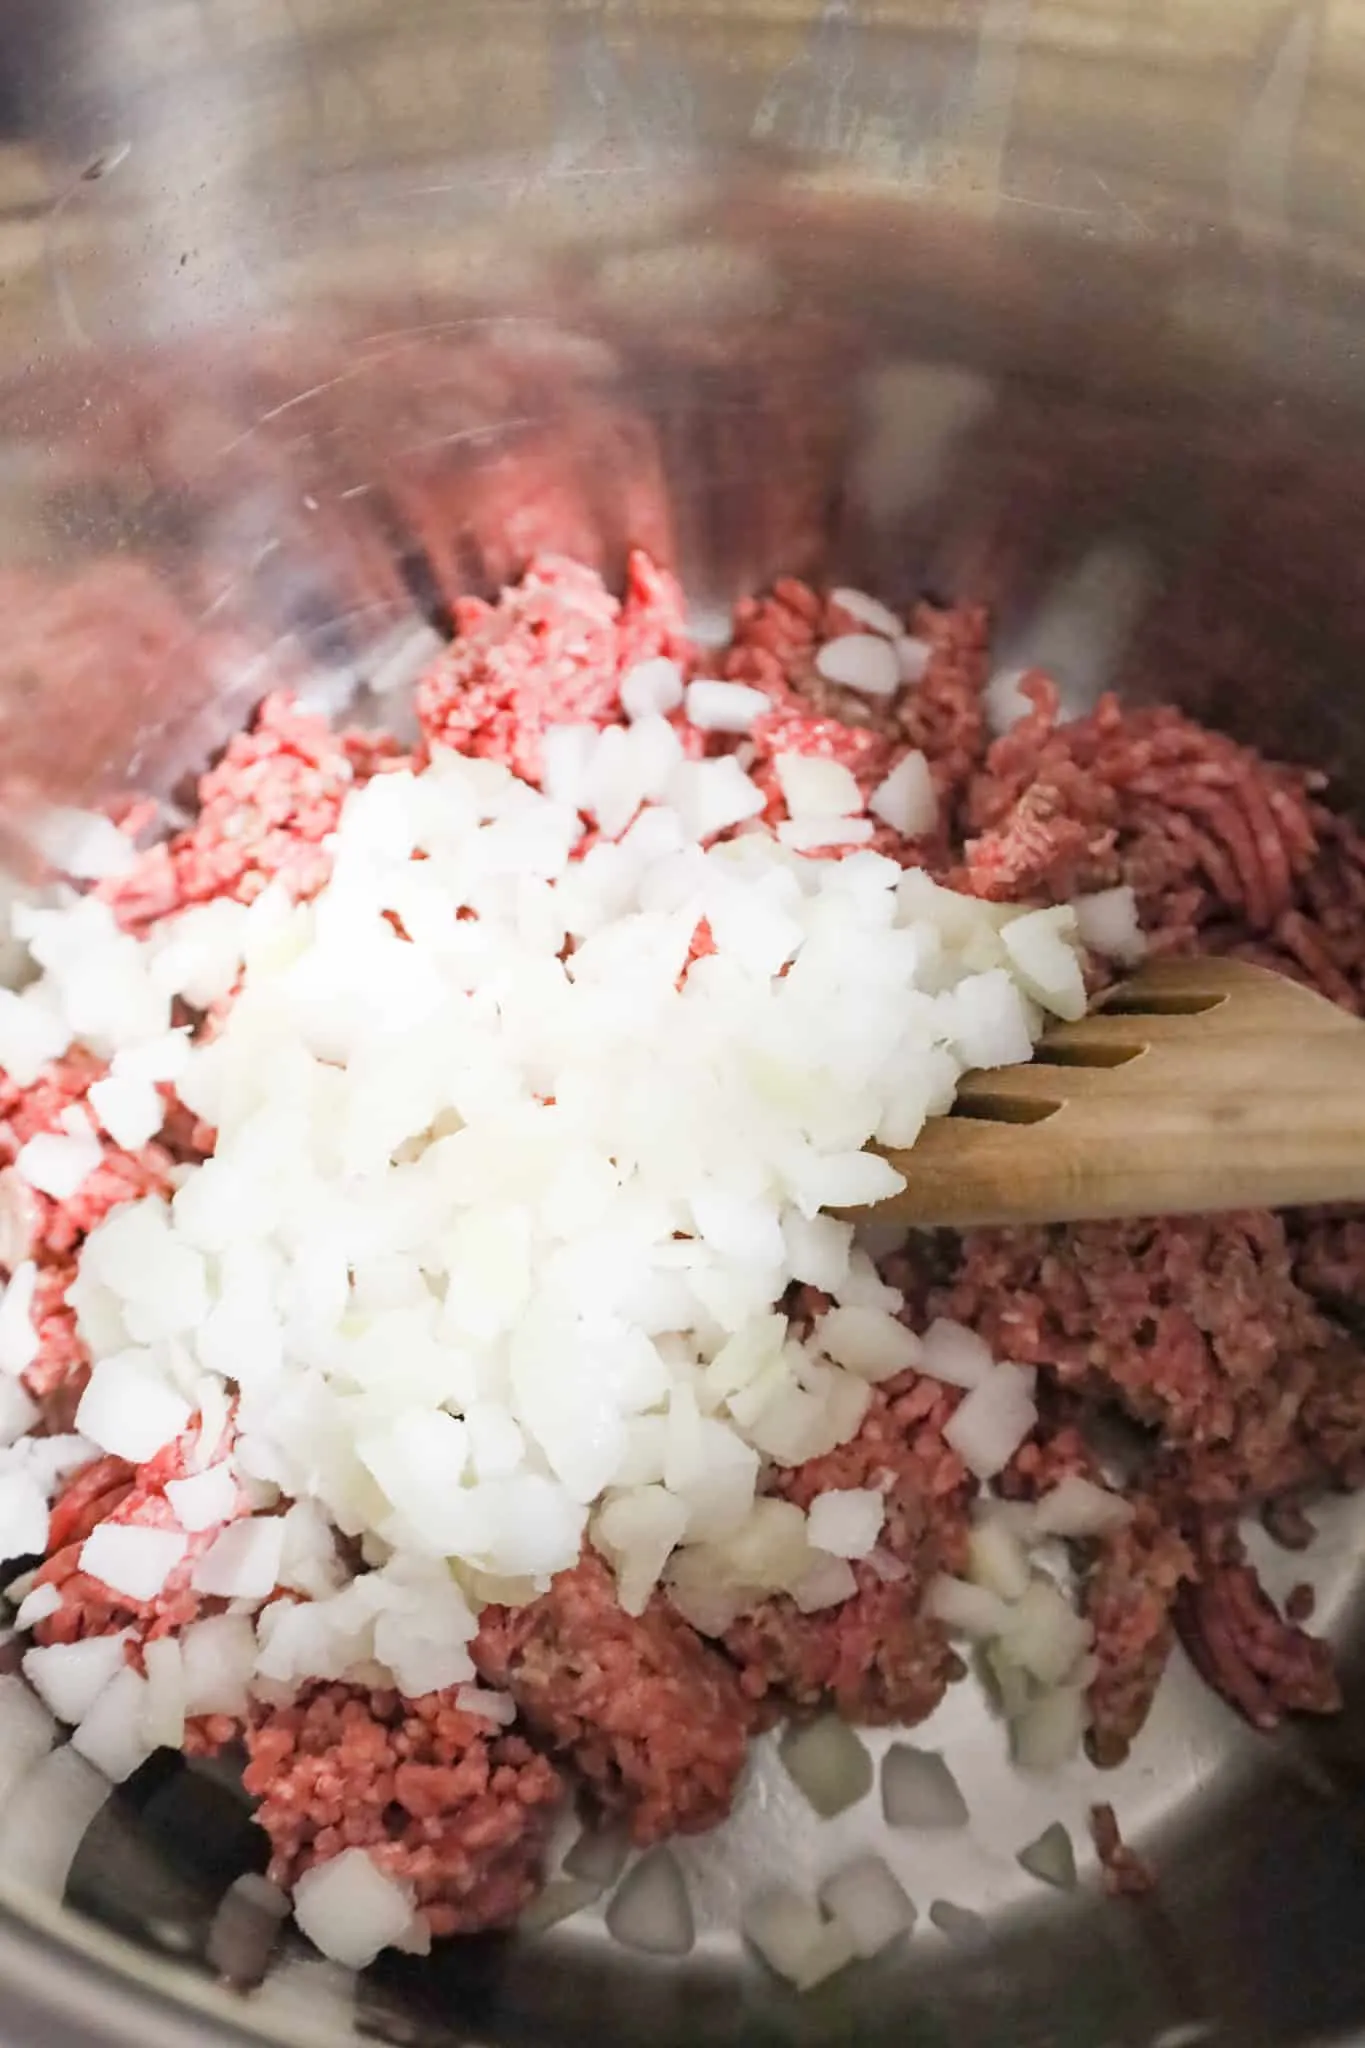 diced onions on top of raw ground beef in an Instant Pot